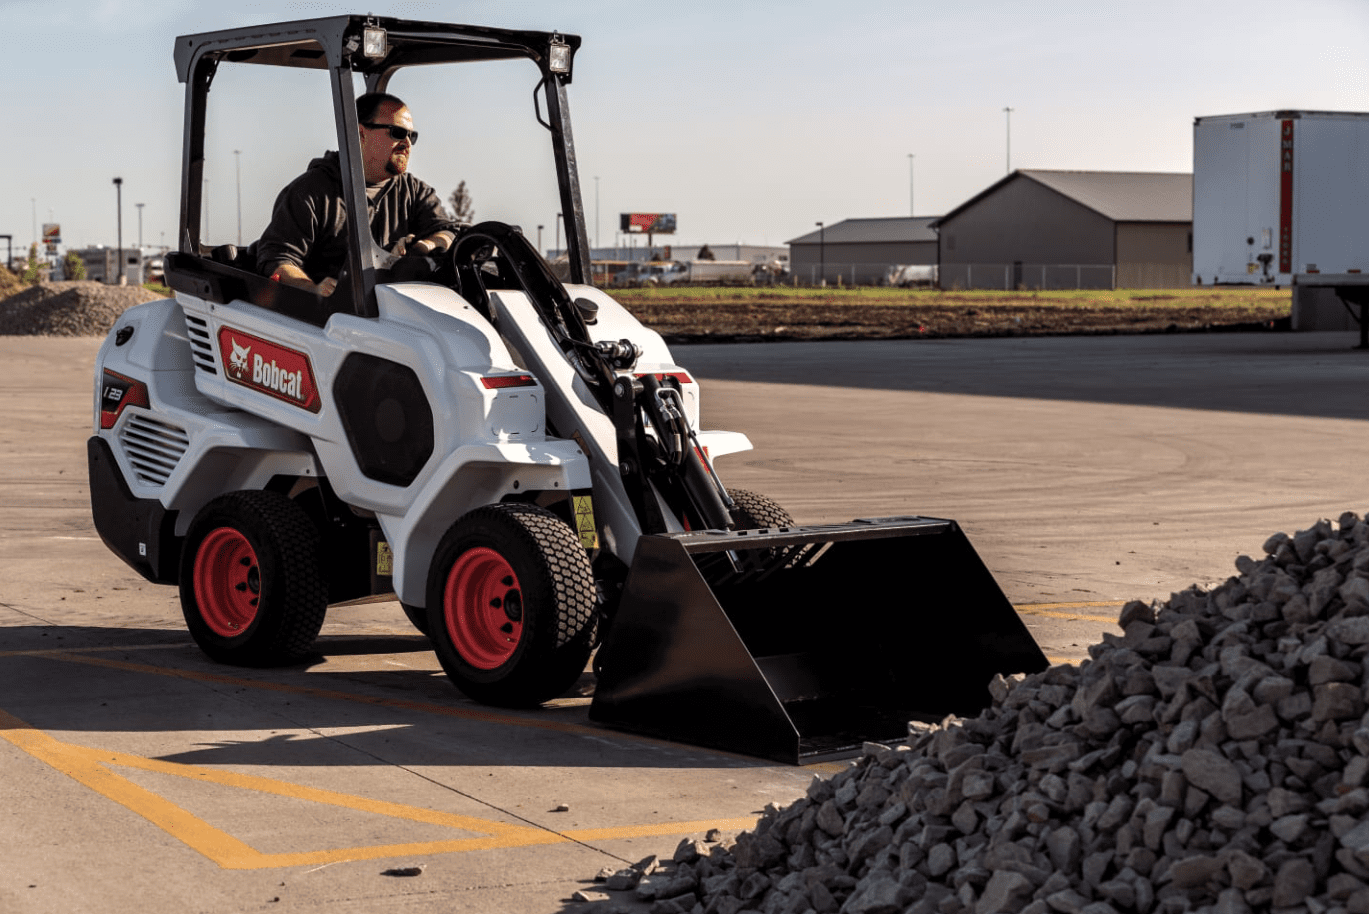 Browse Specs and more for the Bobcat L23 Small Articulated Loader - Bobcat of the Rockies